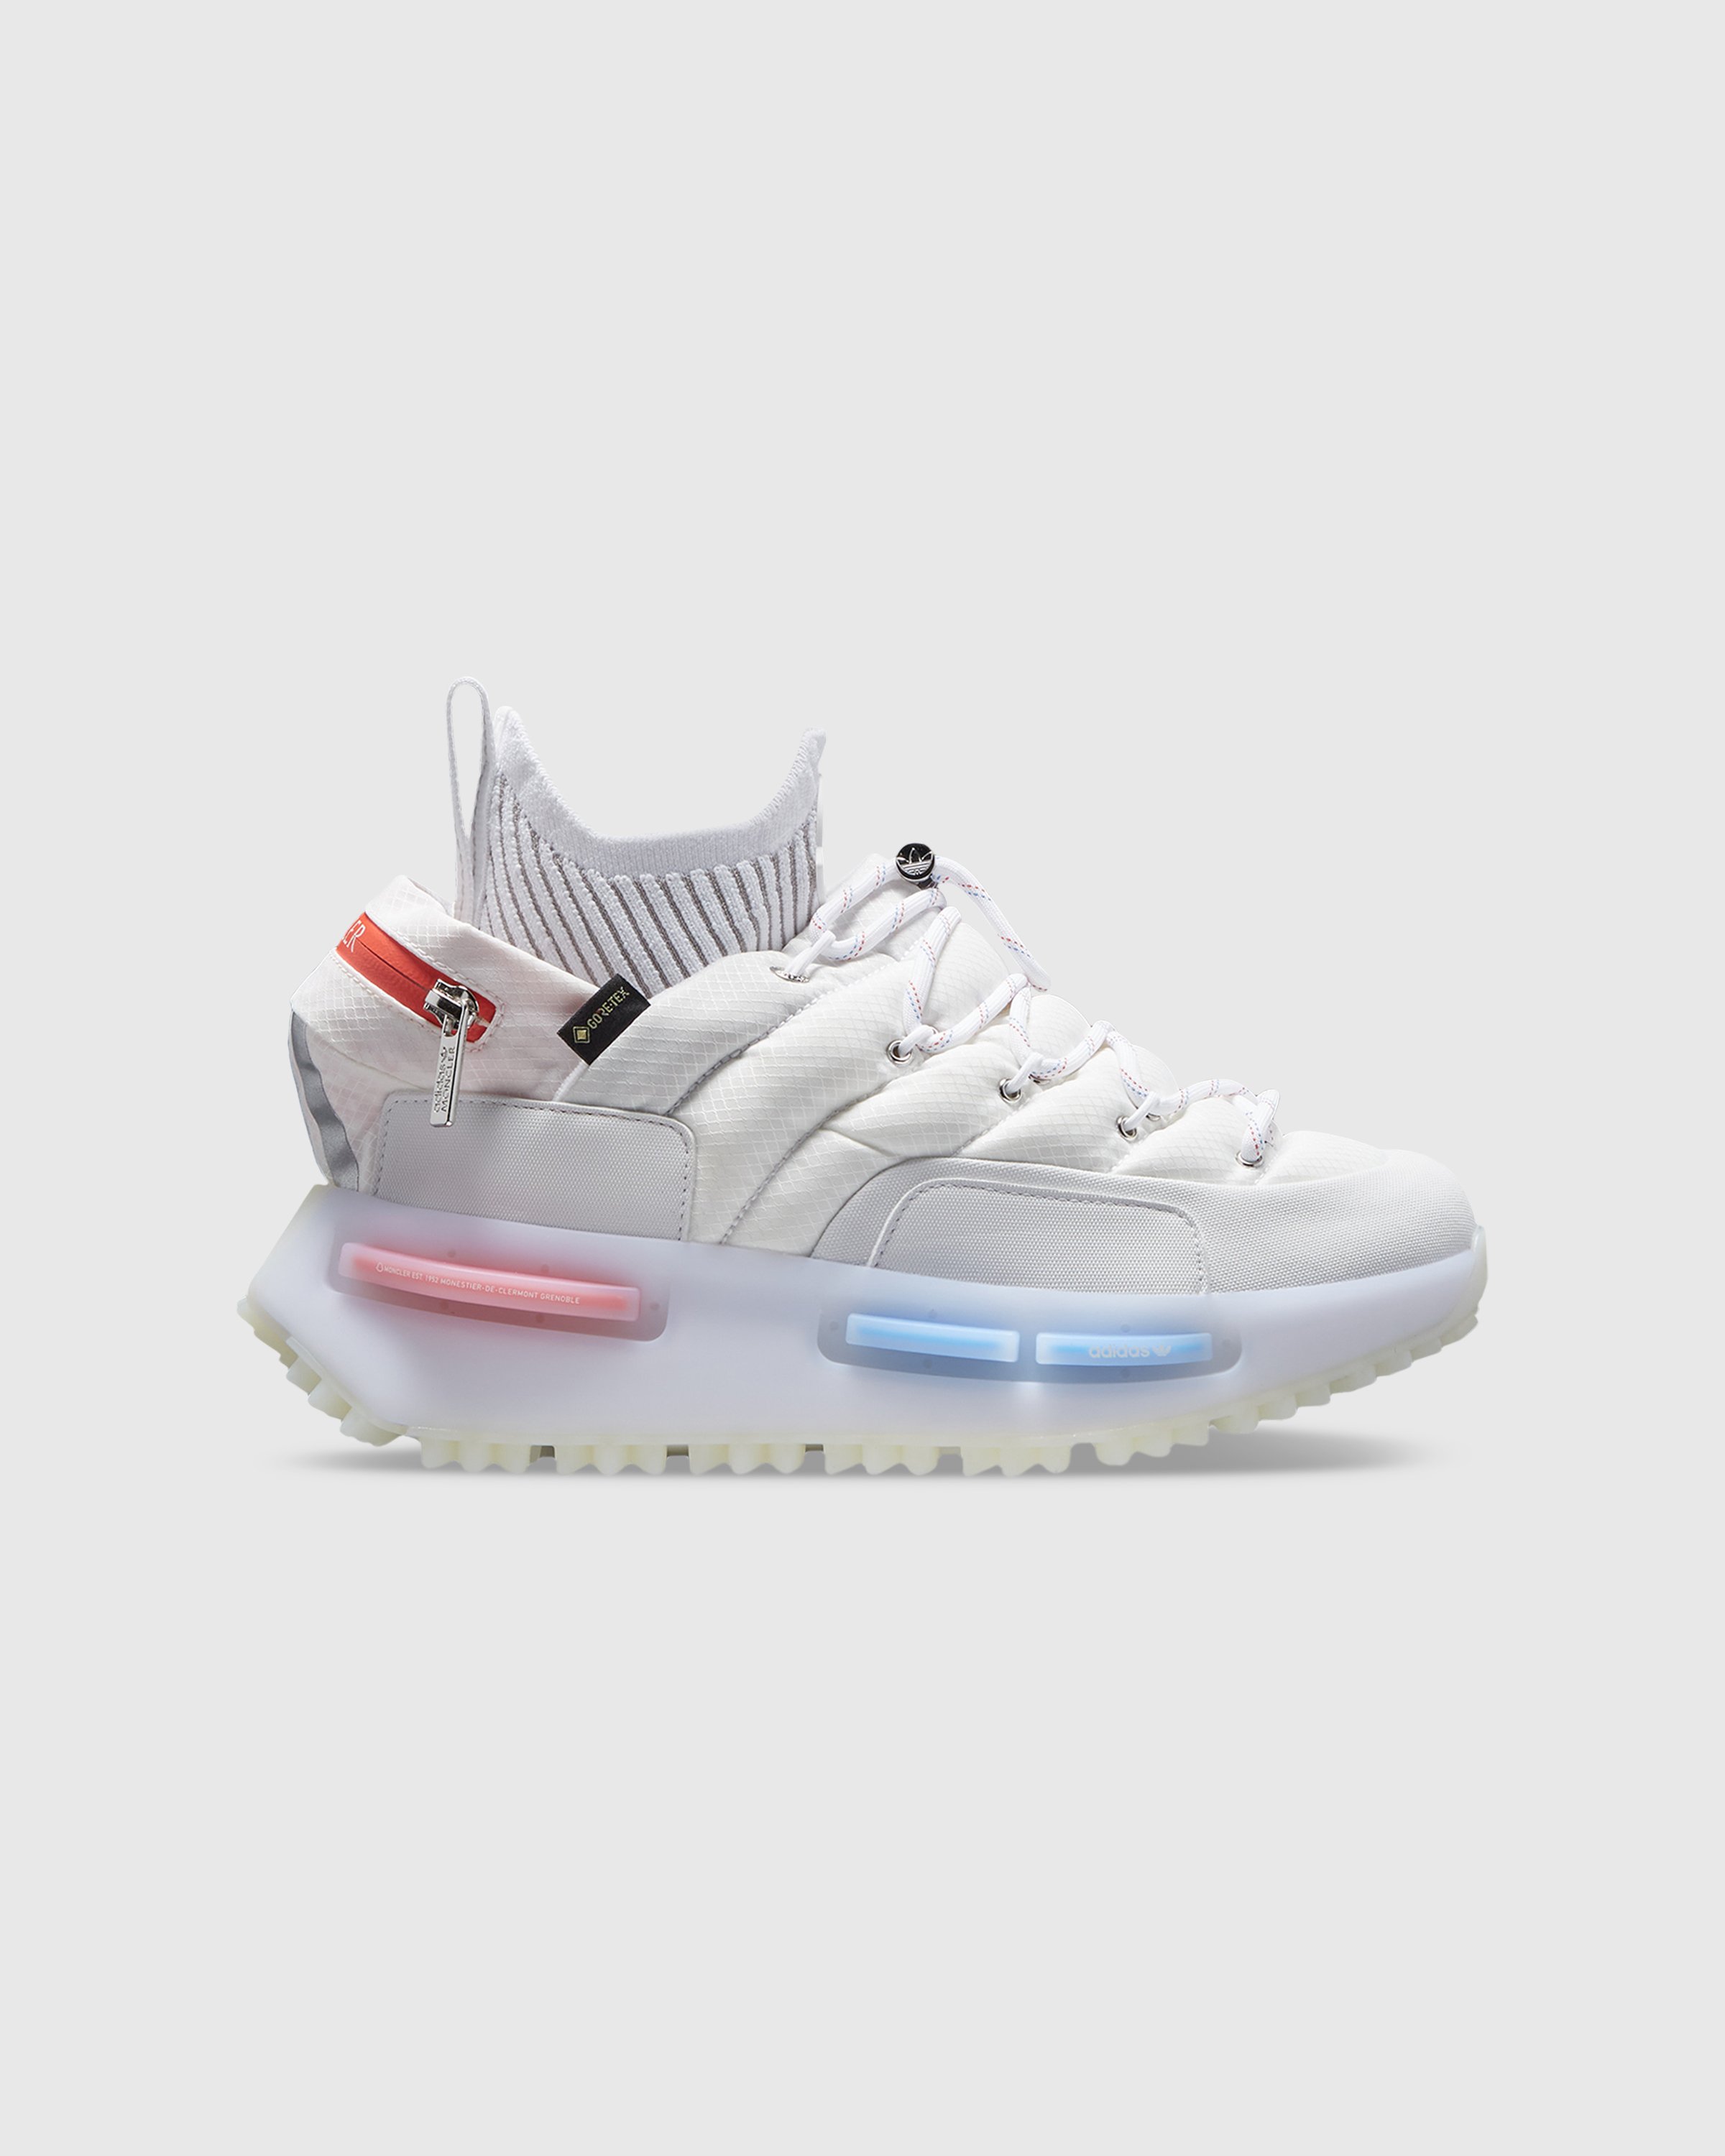 Moncler x adidas Originals - NMD Runner Mid Core White - Footwear - White - Image 1